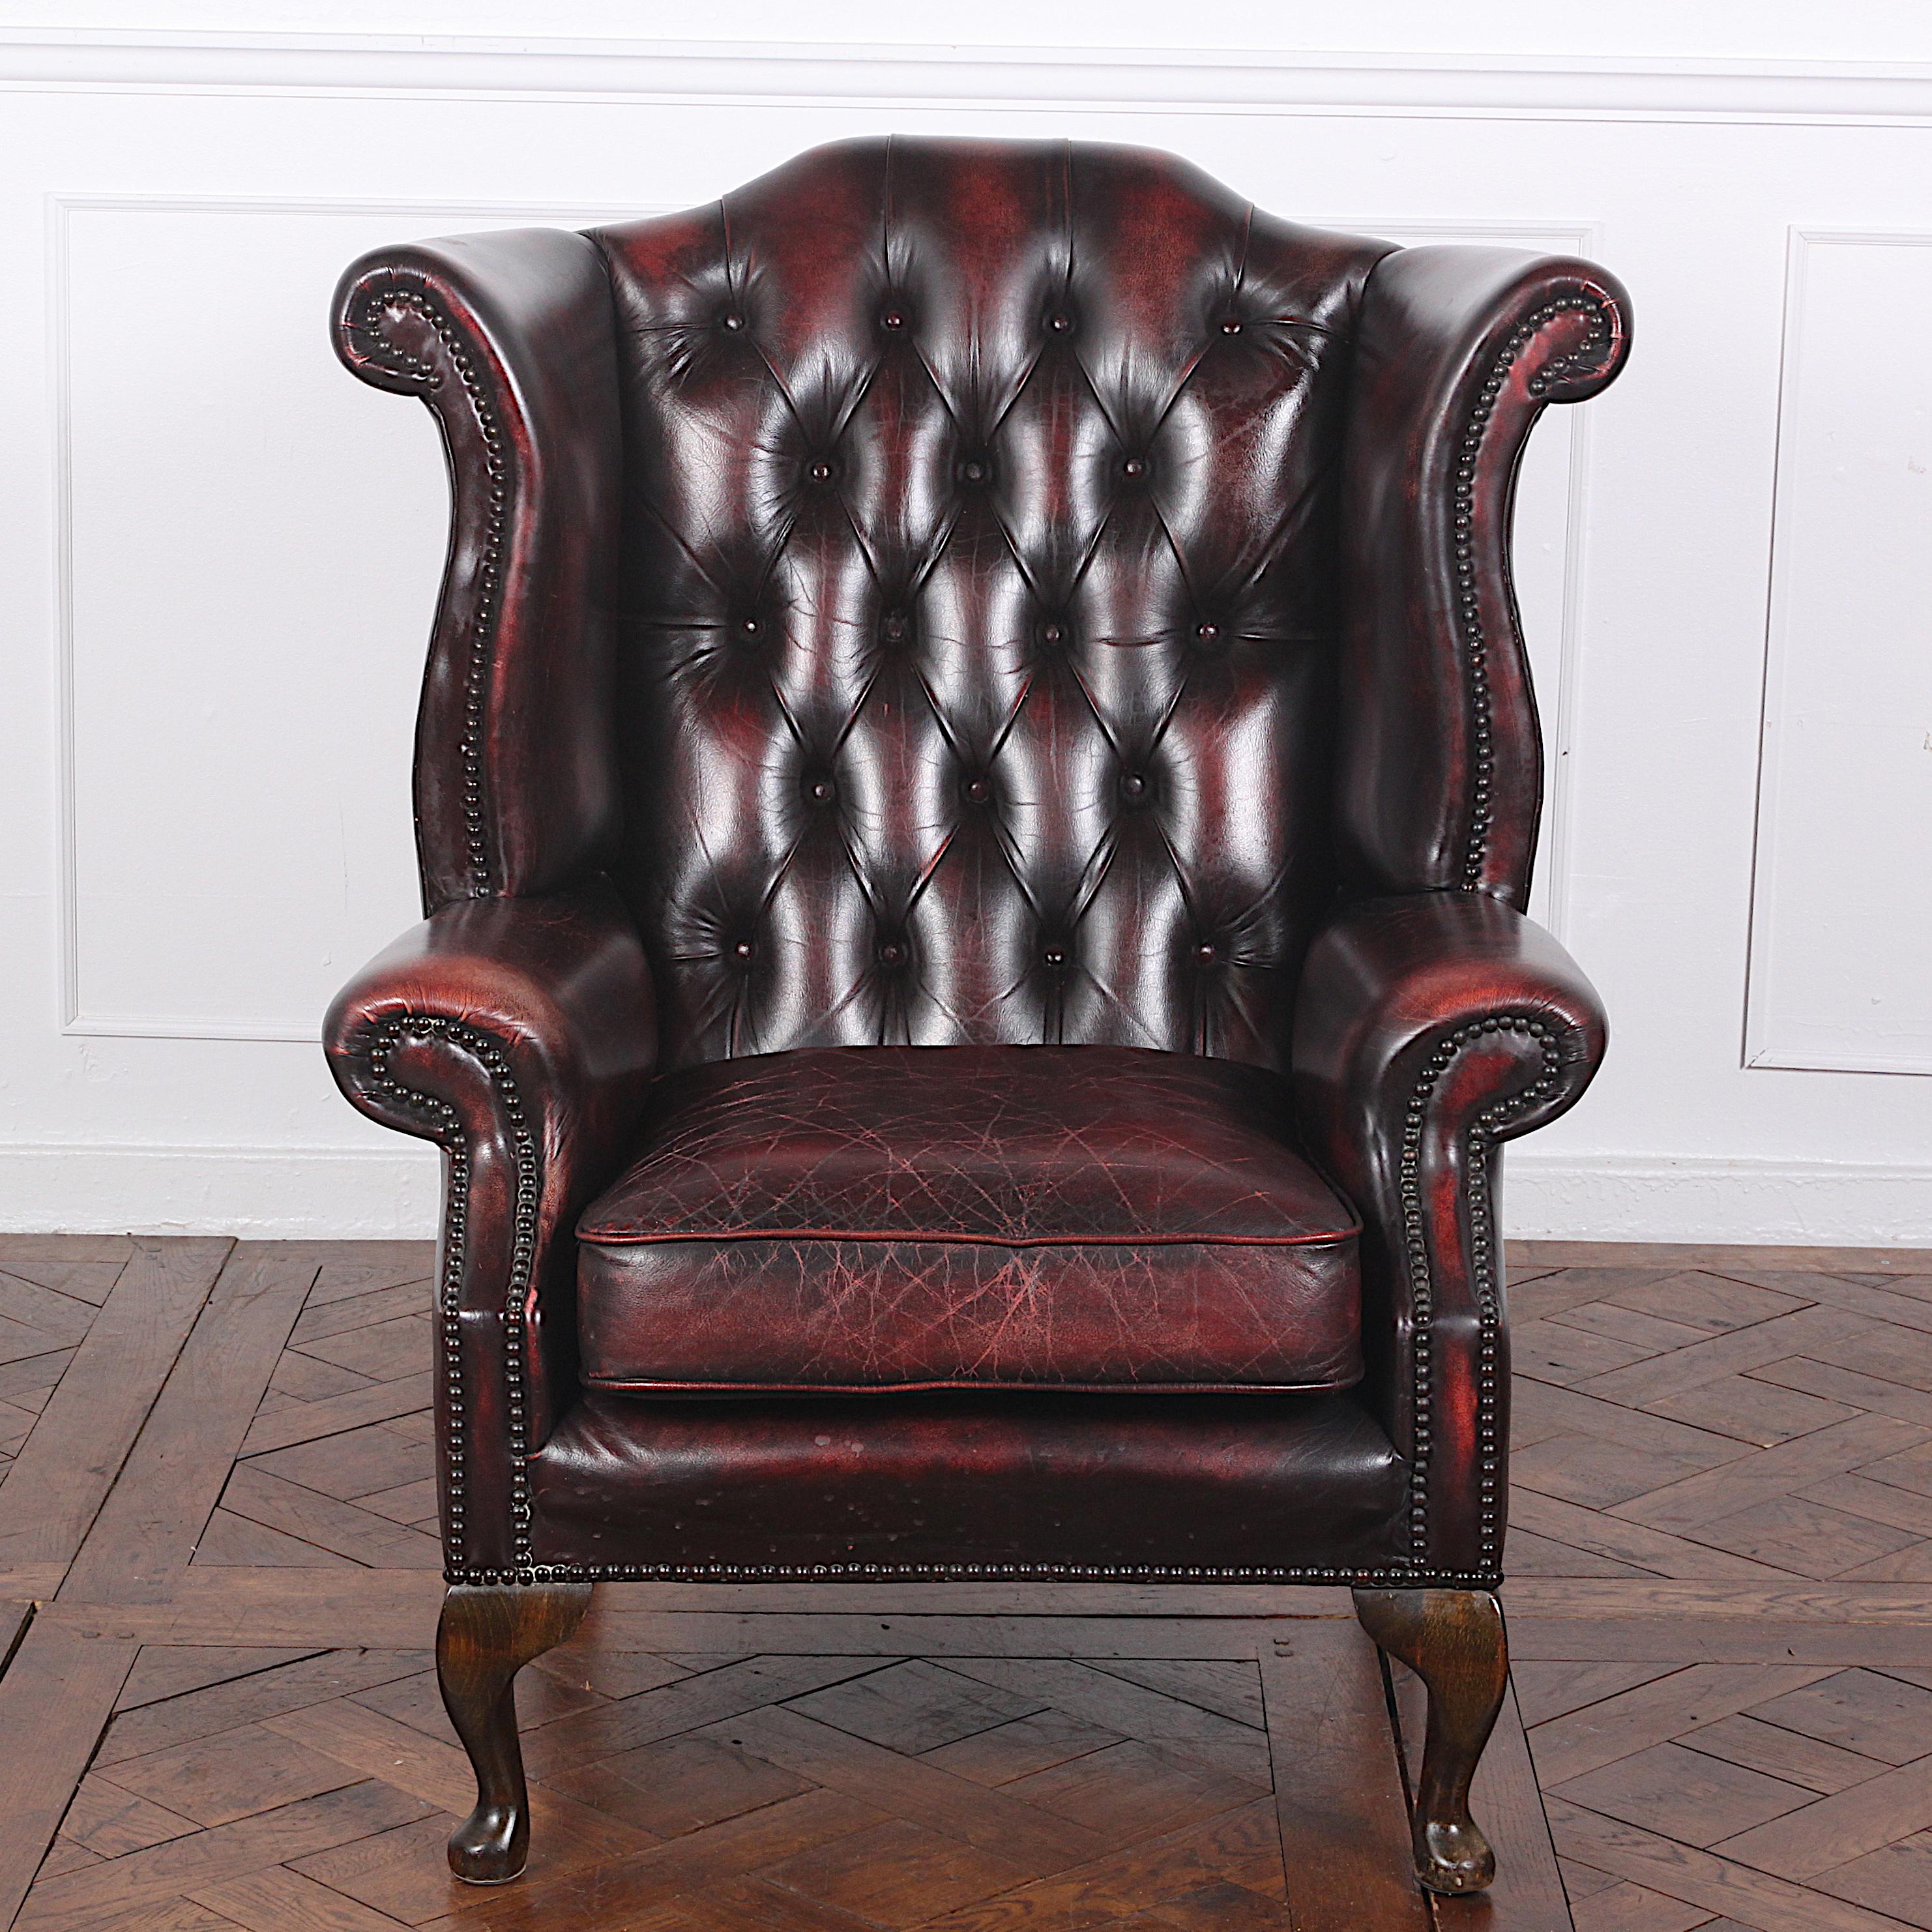 Classic and Elegant British Leather Wingback Chair 1